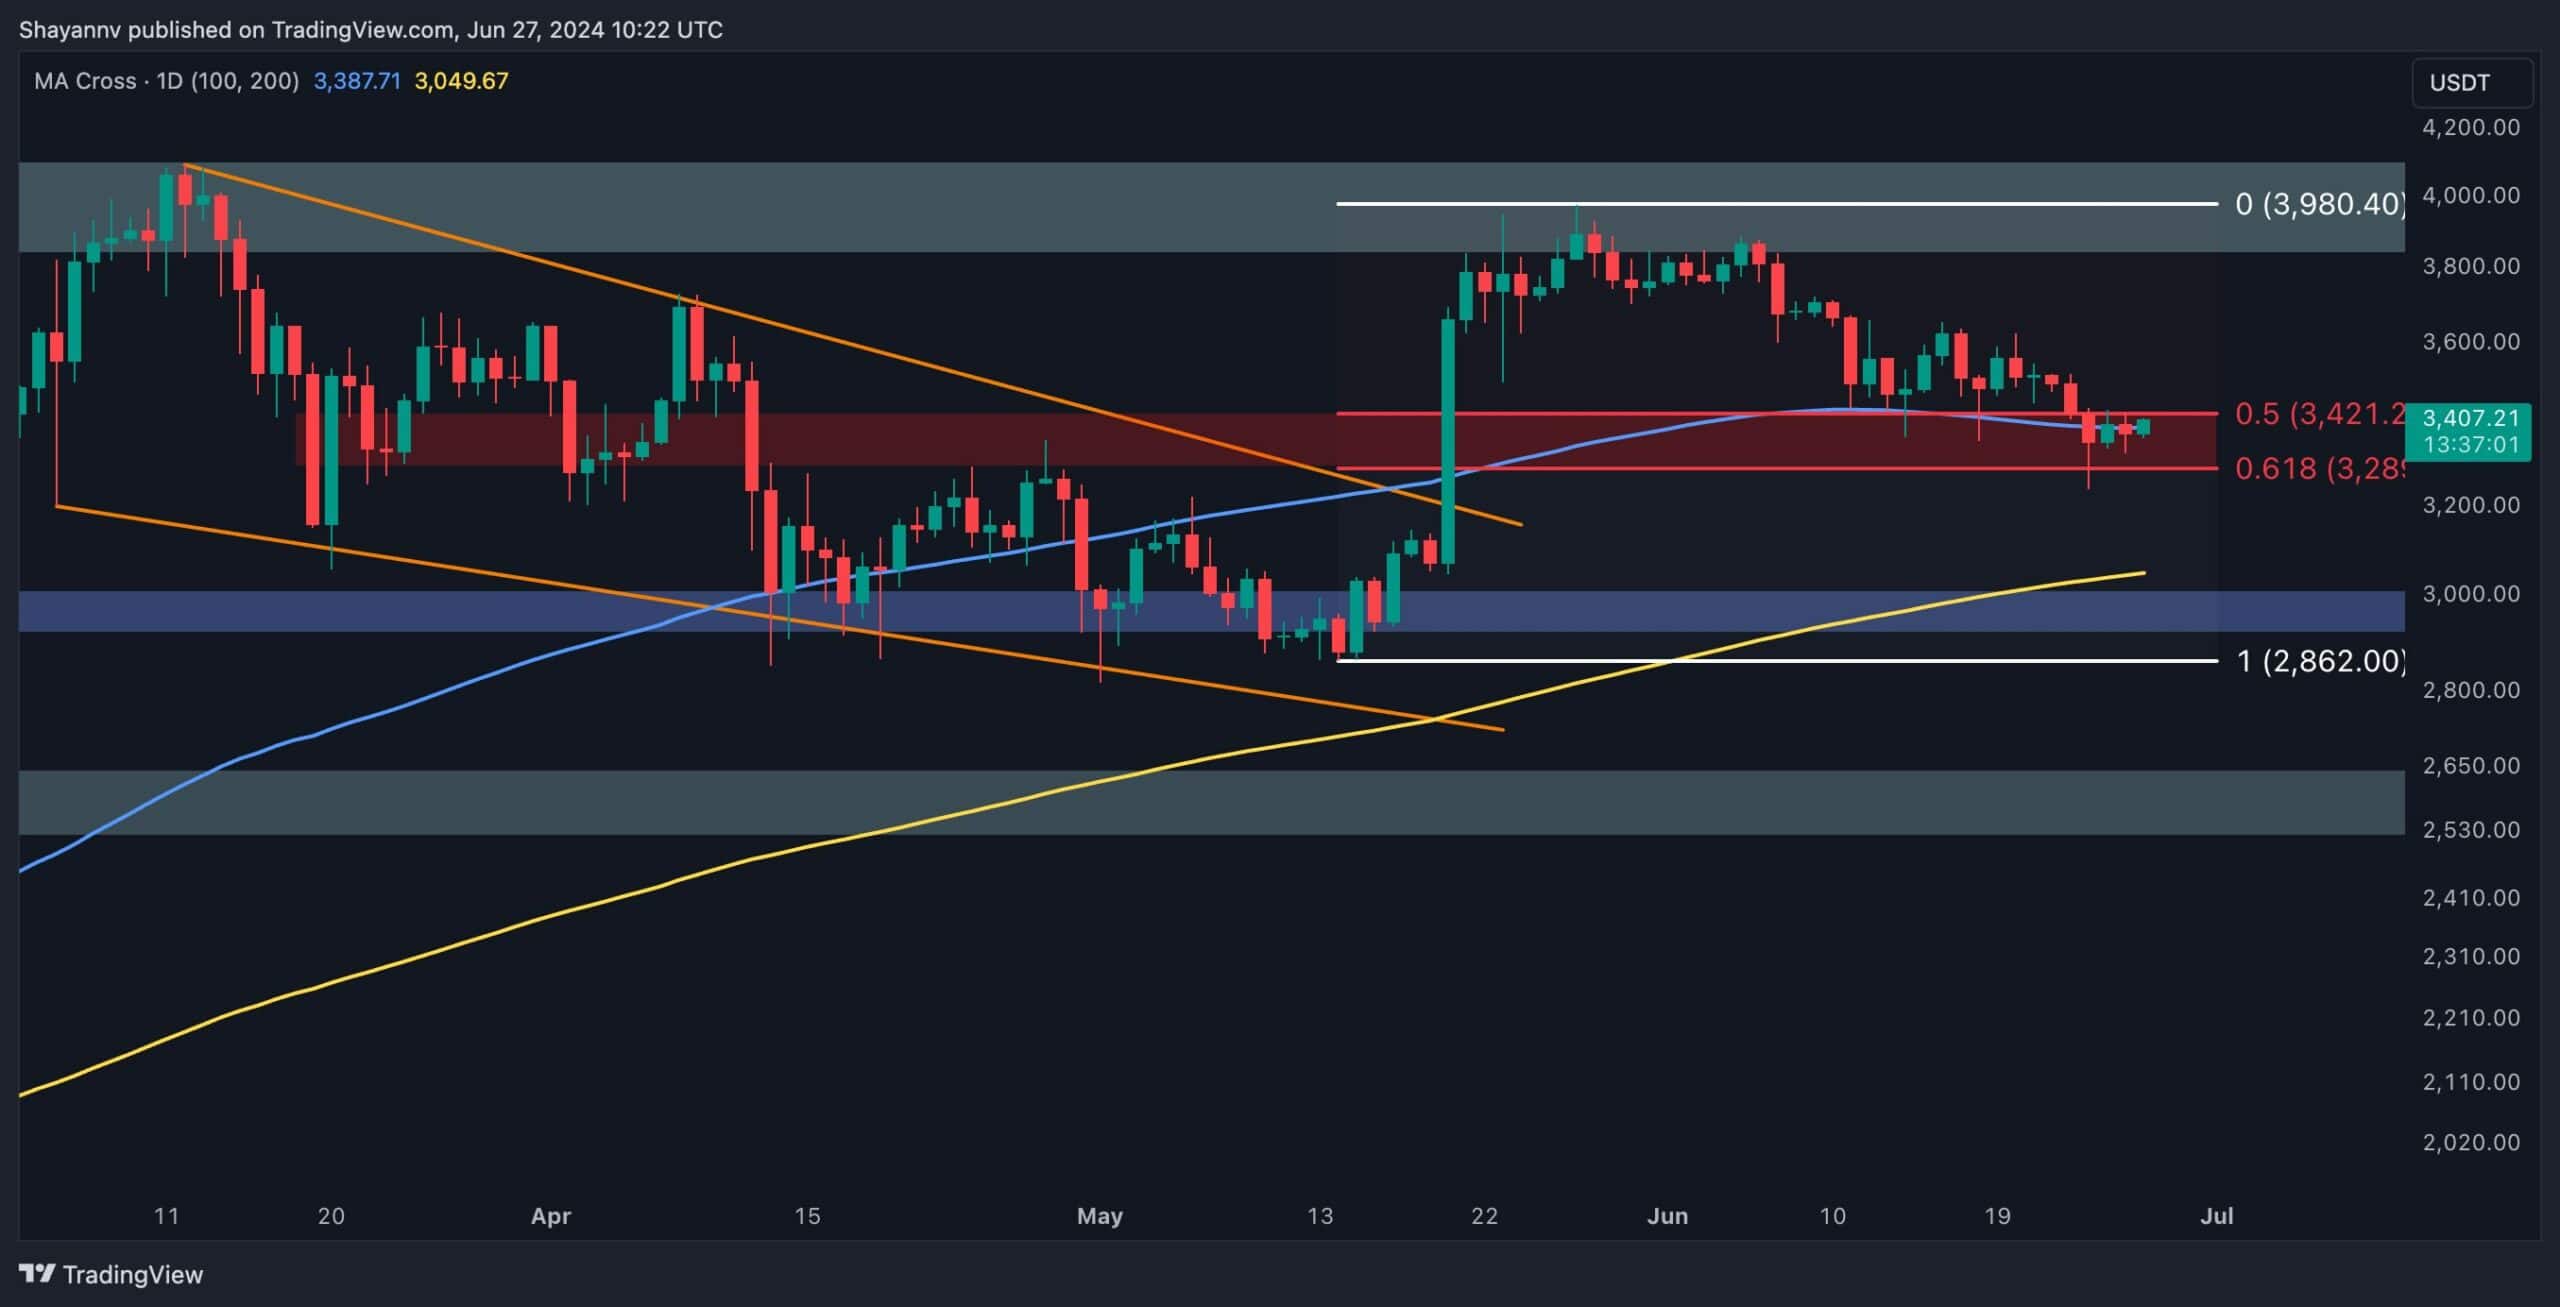 ETH Increases Toward $3.5K, Erases Much of Earlier Losses (Ethereum Price Analysis)